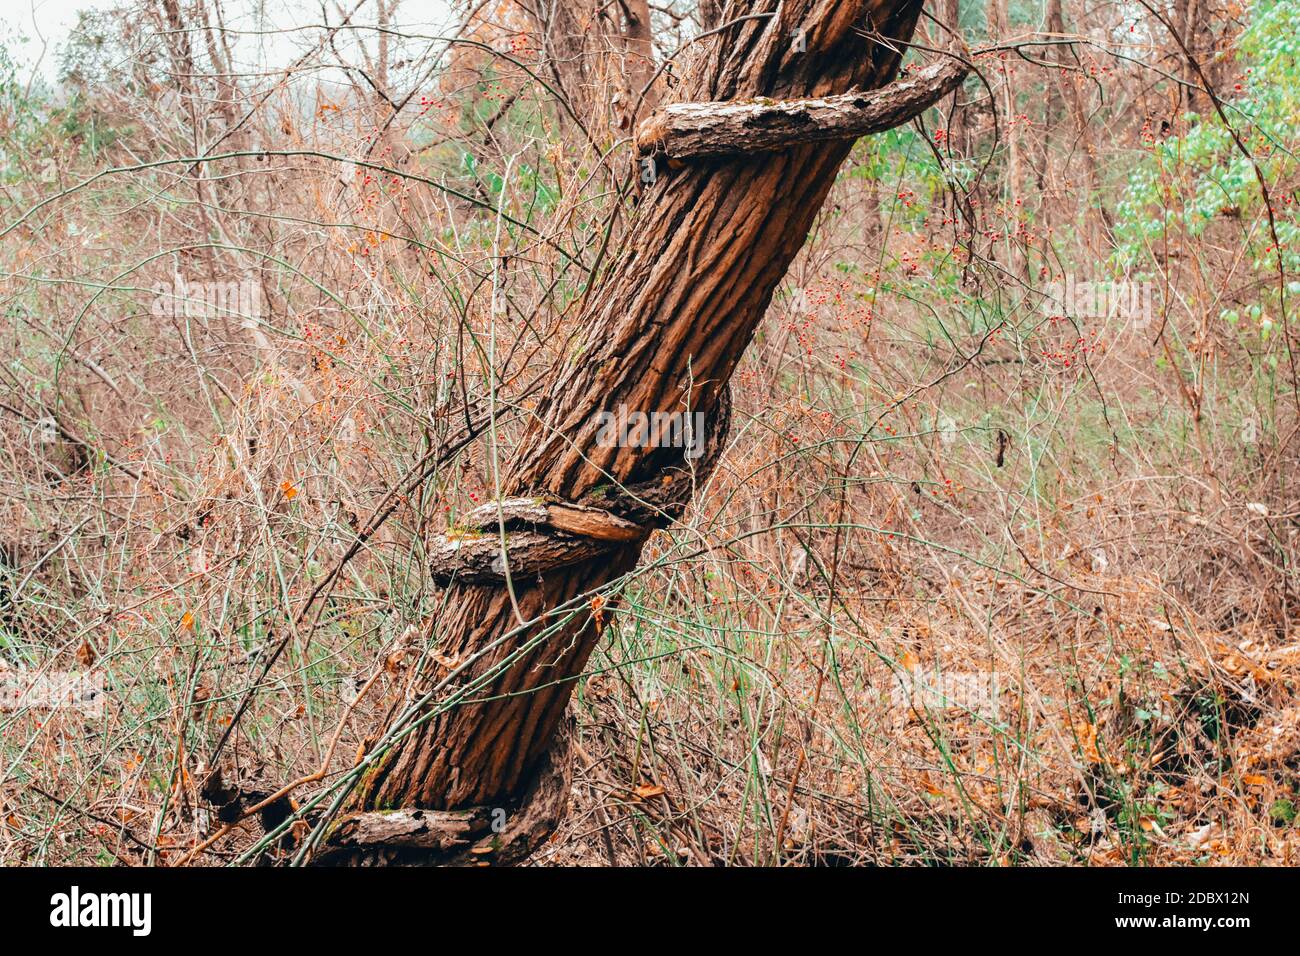 A Tree in a Dead Forest With a Vine Wrapped Tightly Around It Stock Photo